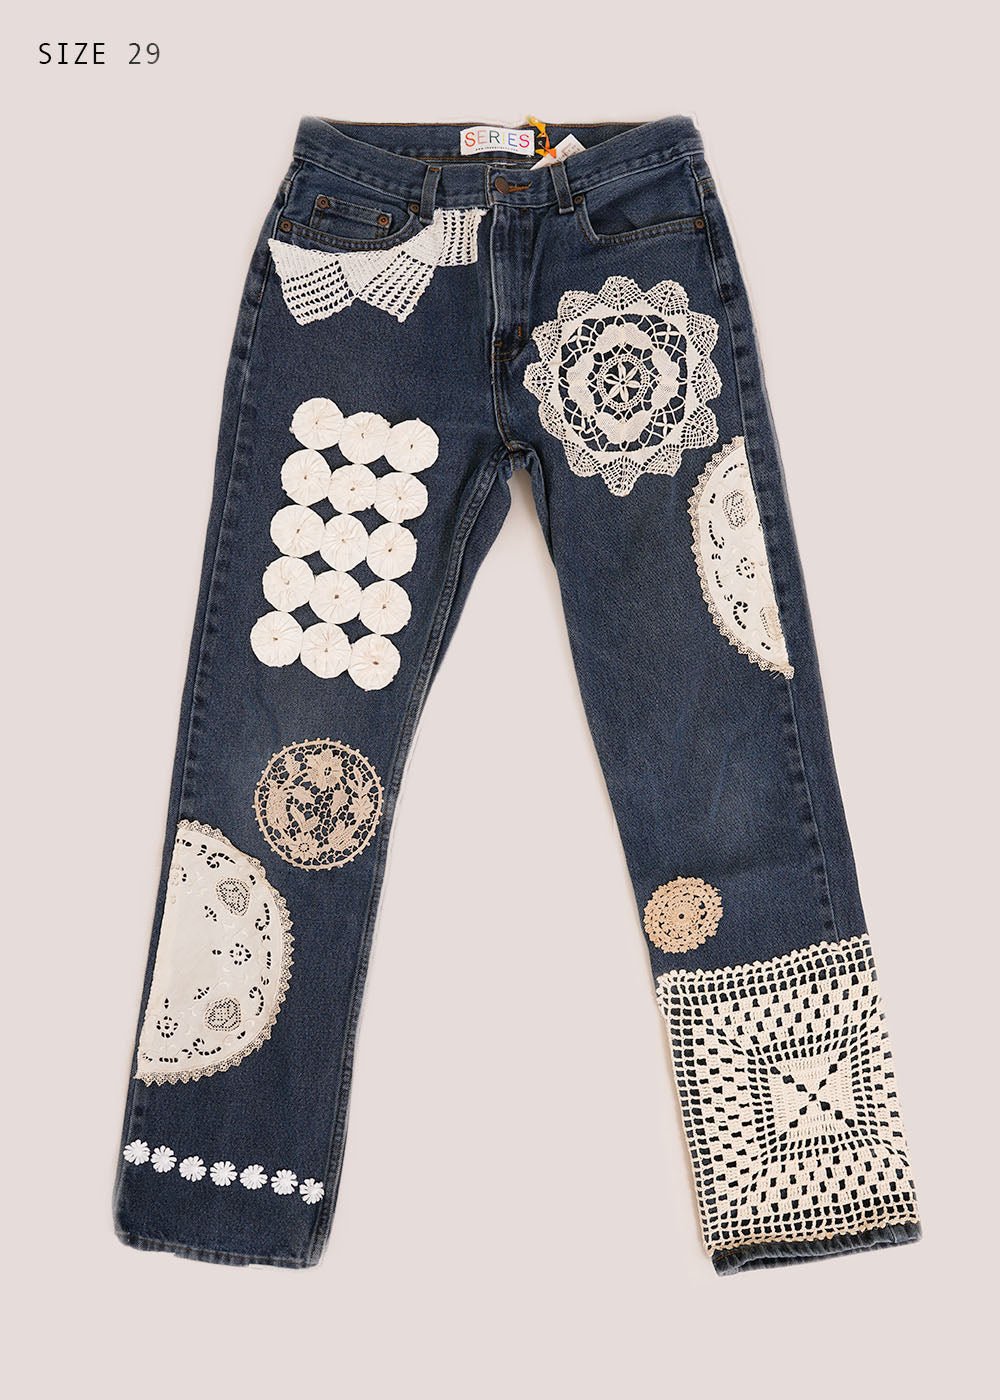 THE SERIES Doily Denim Pants - New Classics Studios Sustainable Ethical Fashion Canada